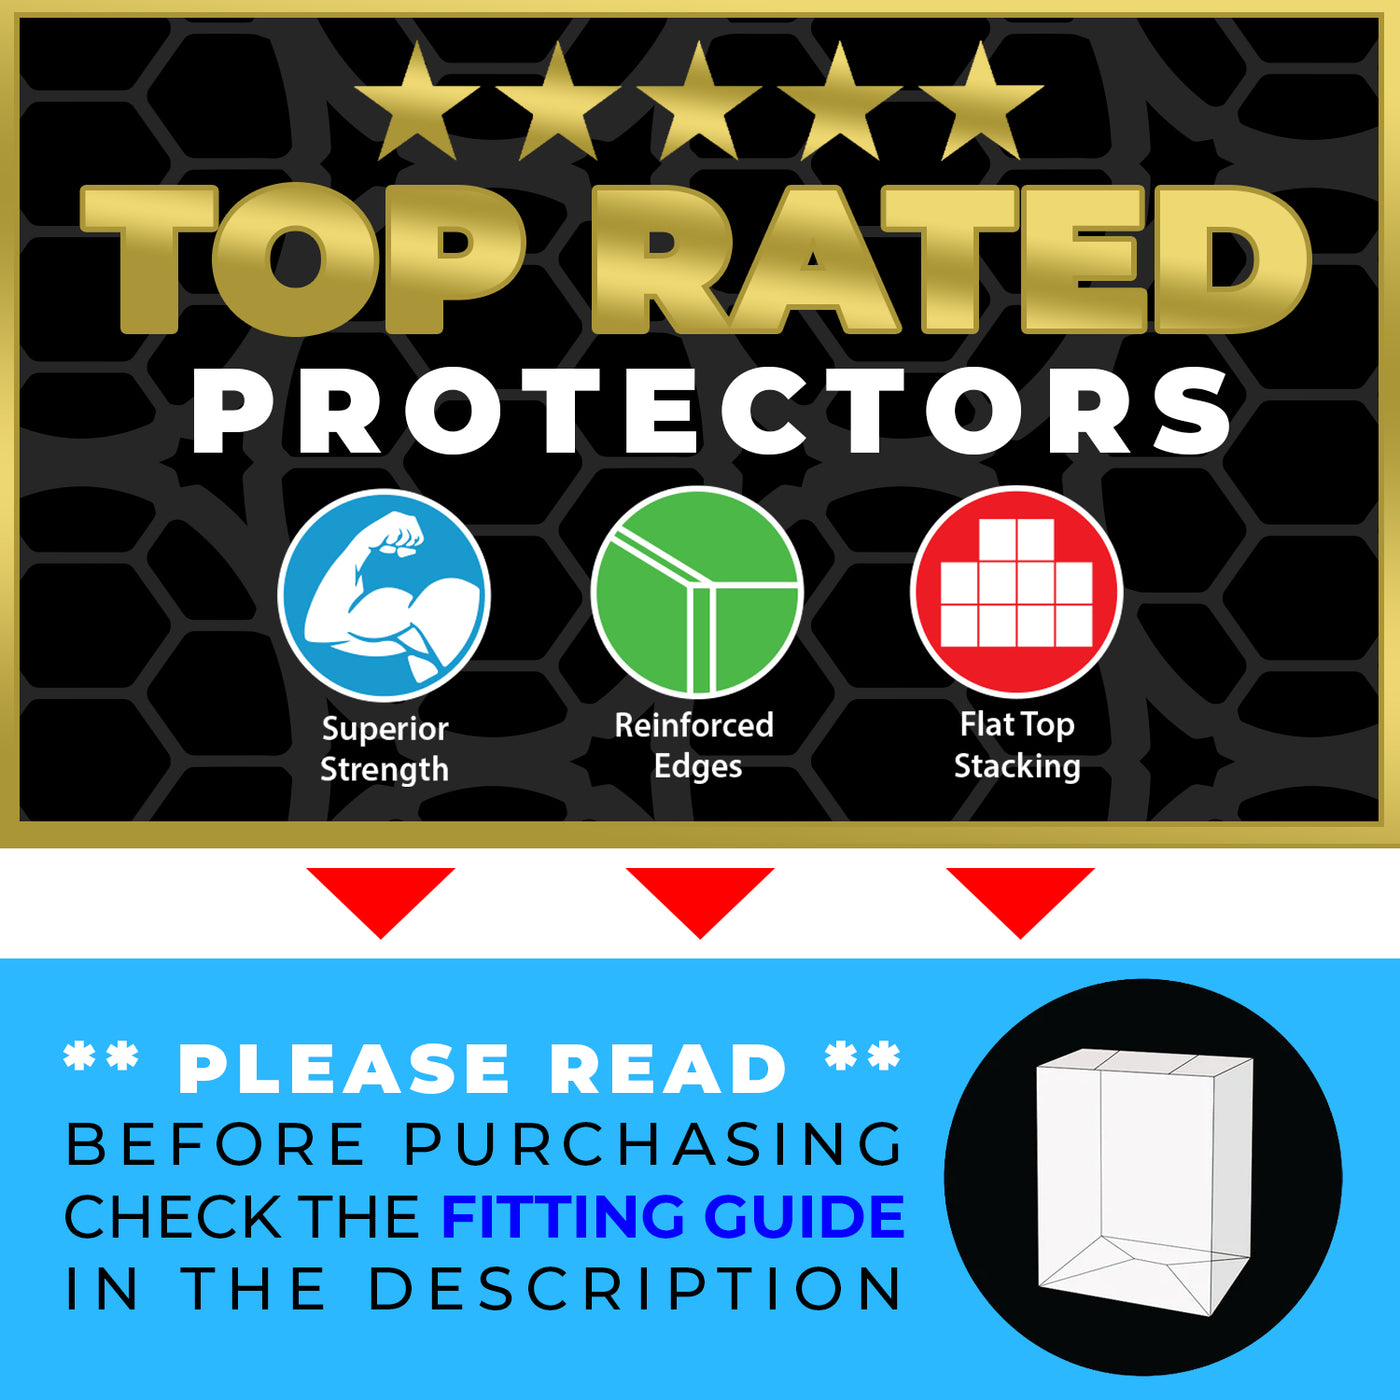 5 pack best funko pop protectors thick strong uv scratch flat top stack vinyl display geek plastic shield vaulted eco armor fits collect protect display case kollector protector